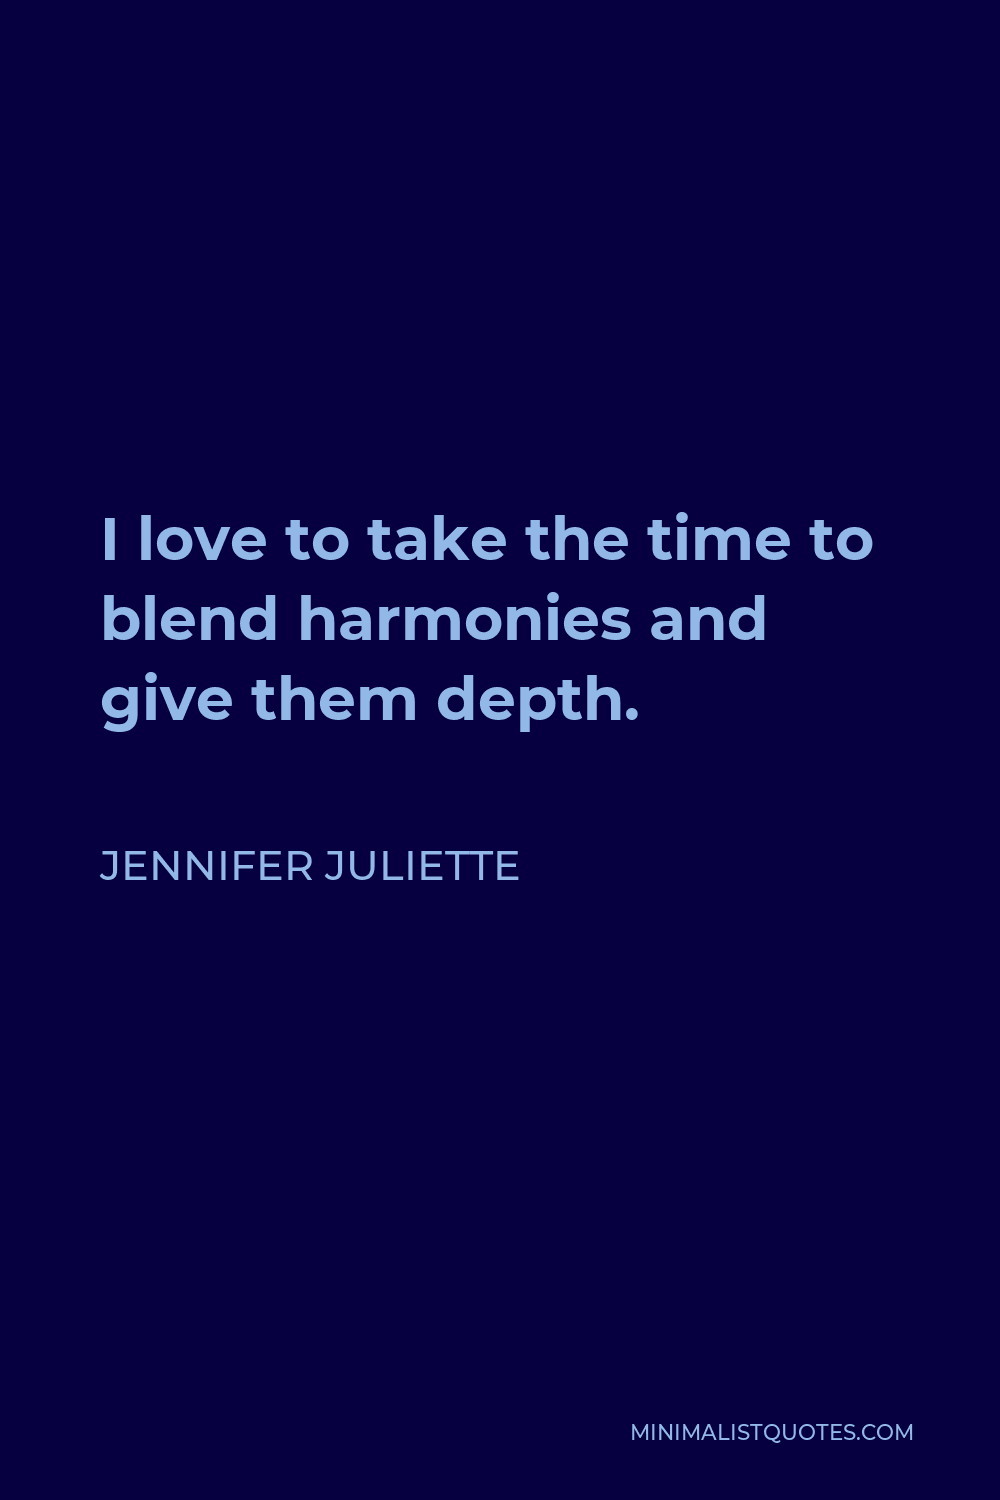 Jennifer Juliette Quote - I love to take the time to blend harmonies and give them depth.